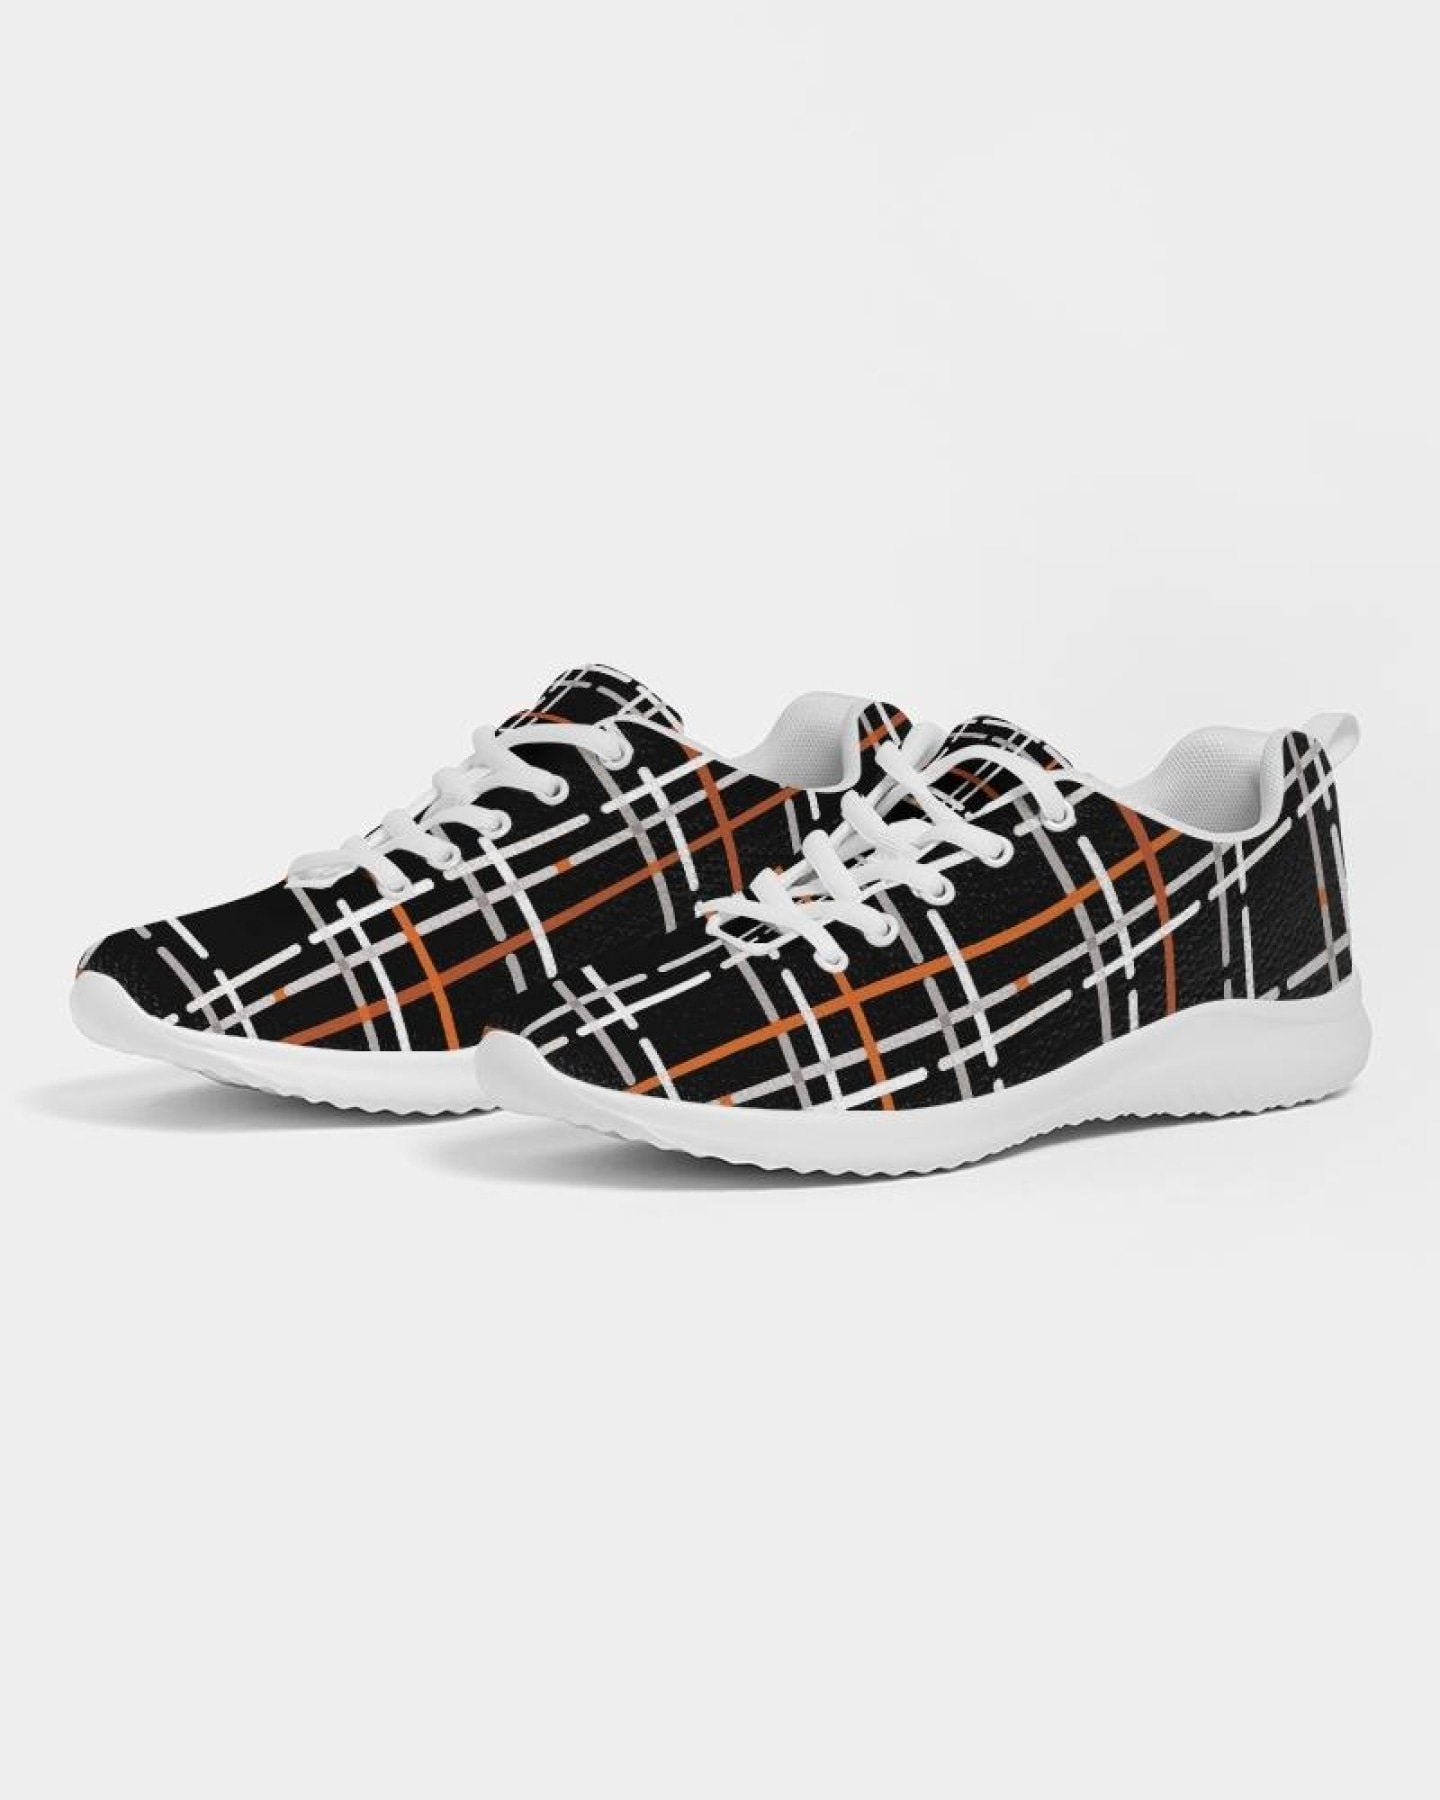 Uniquely You Womens Sneakers - Black Plaid Style Low Top Canvas